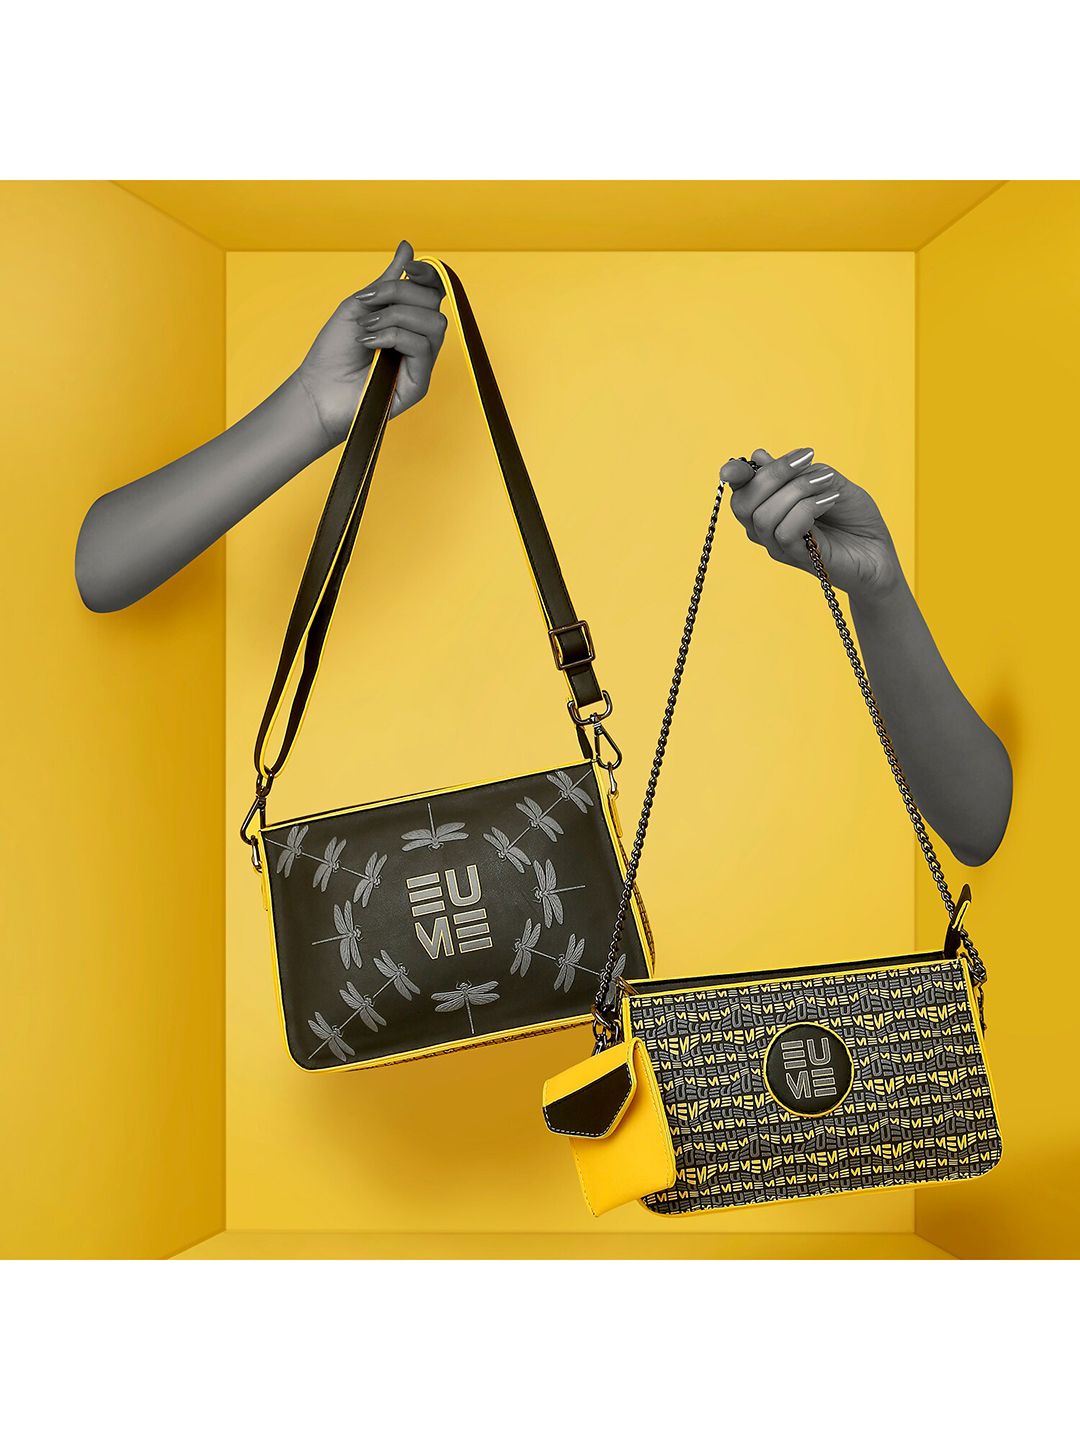 EUME Black Textured Structured Handheld Bag Price in India